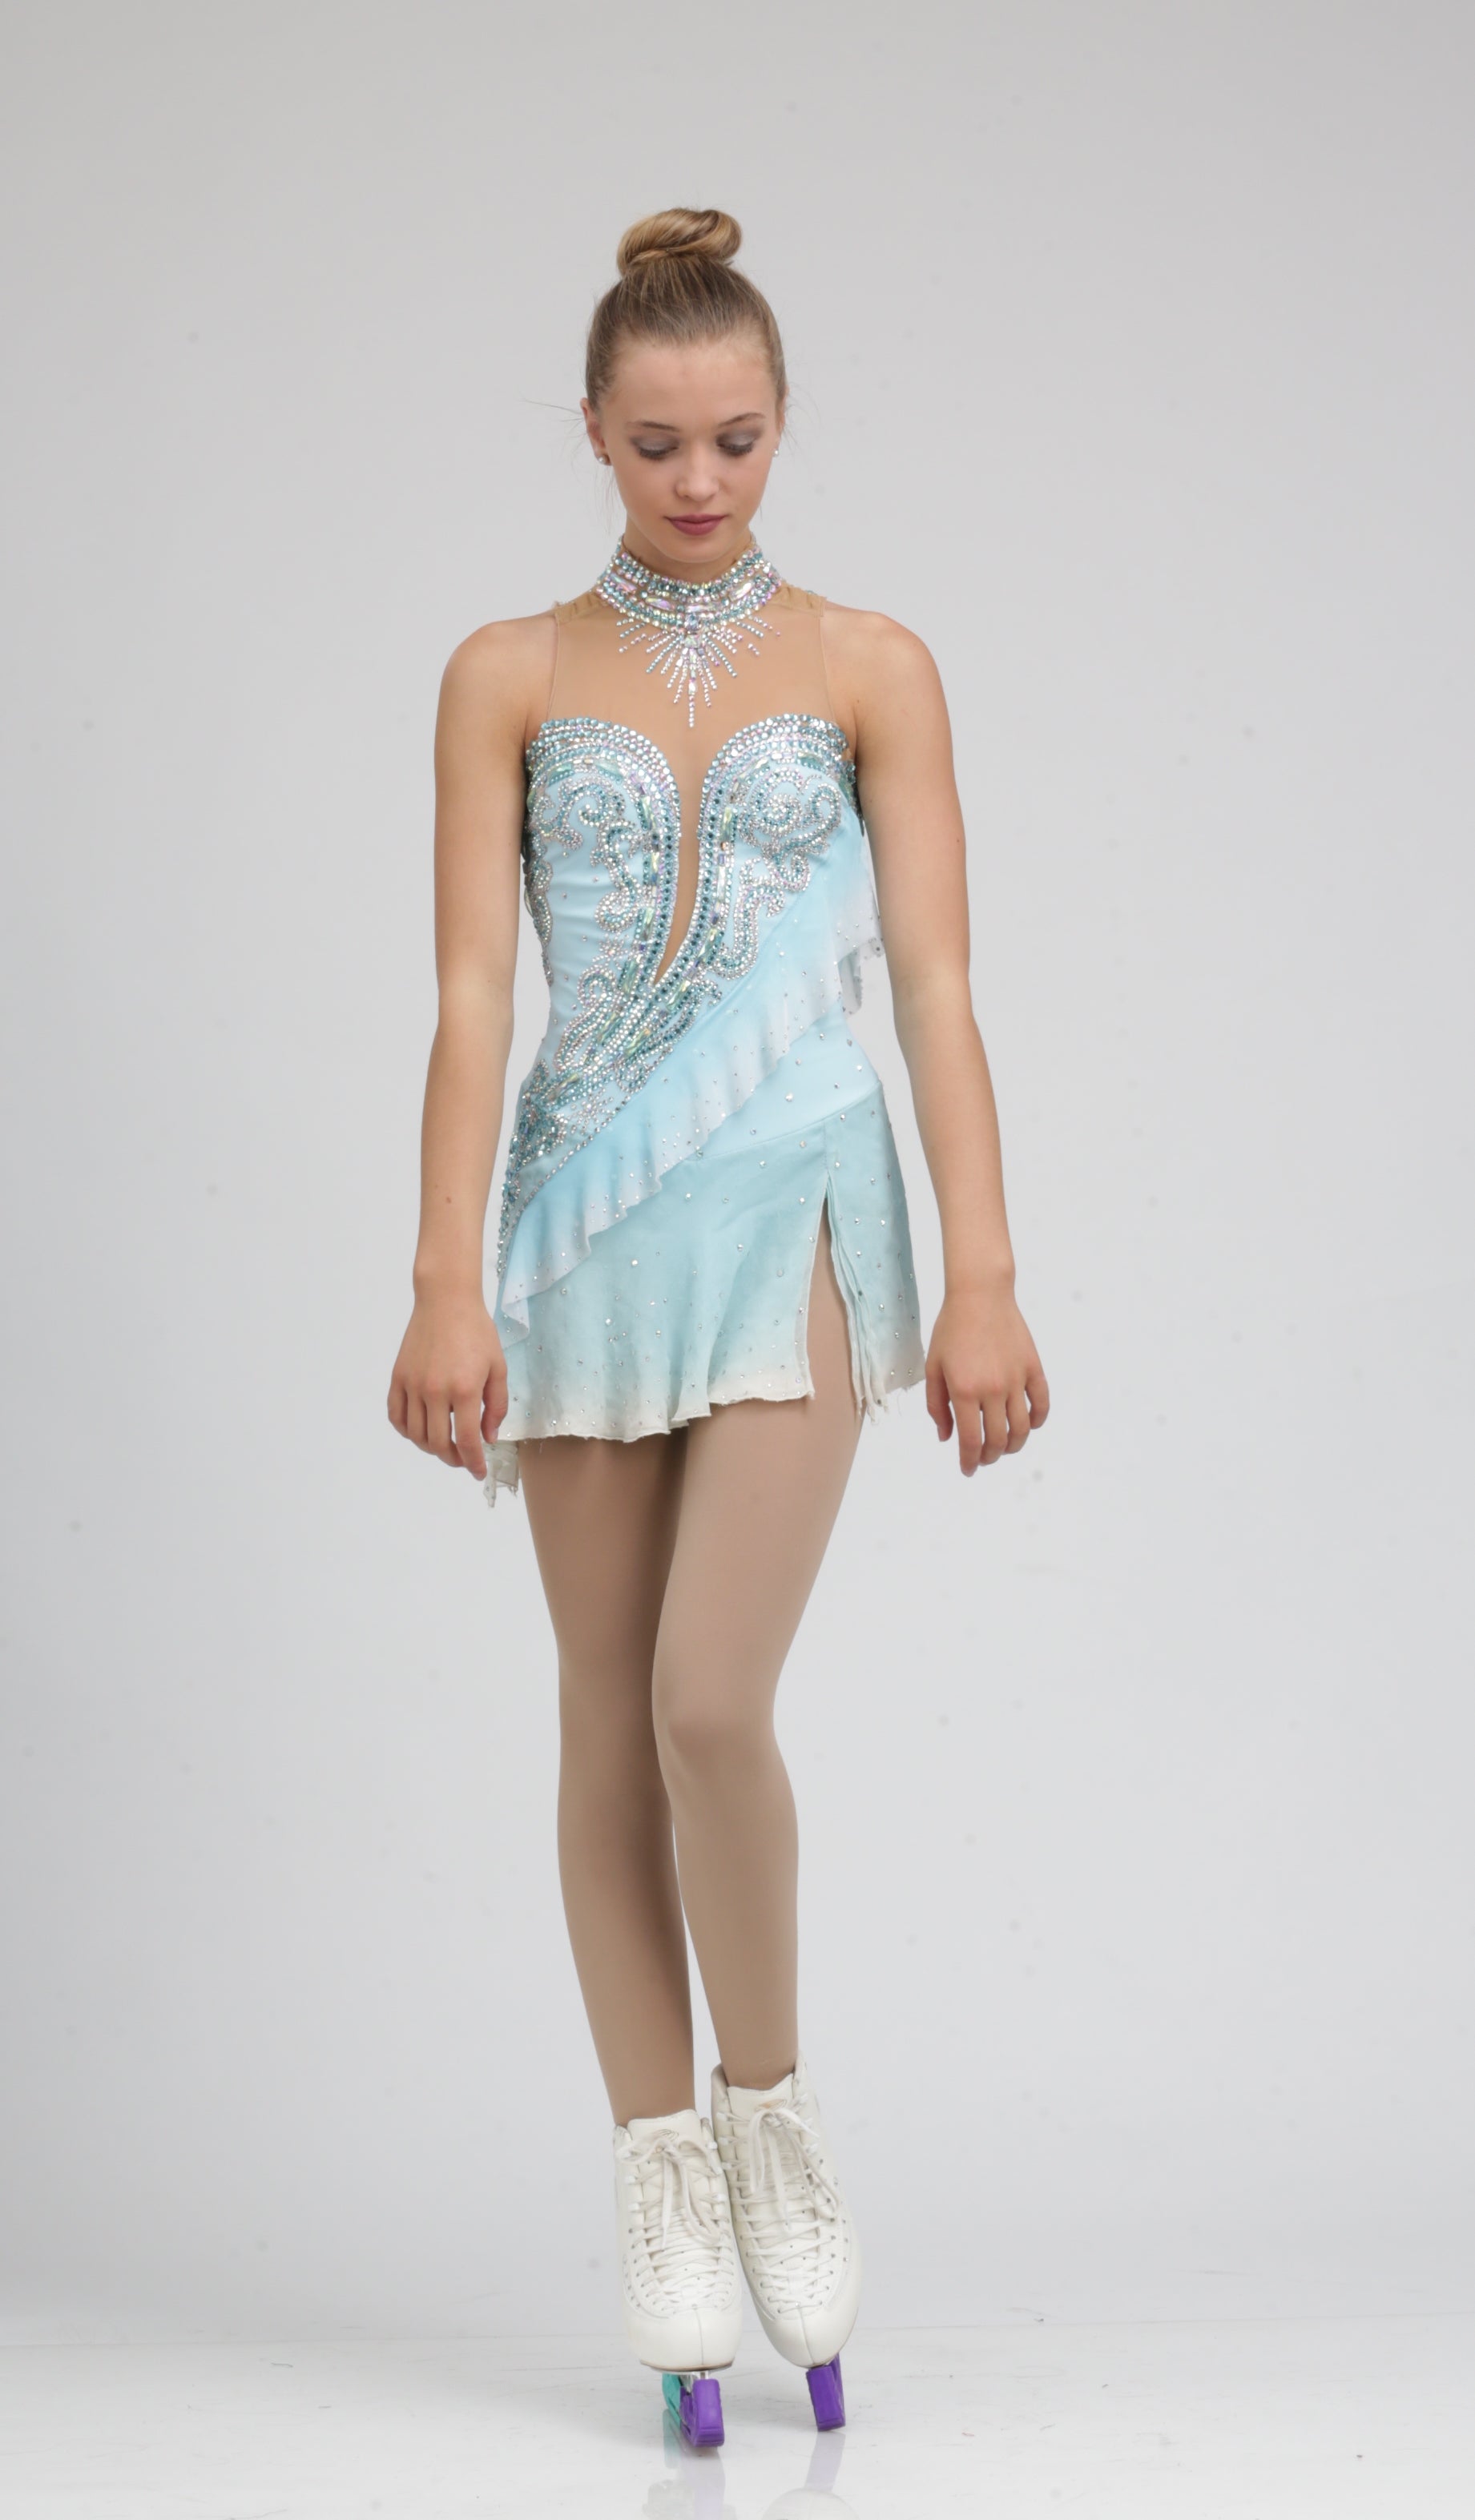 Ombre white and Ice blue figure skating dress by Tania Bass #1870